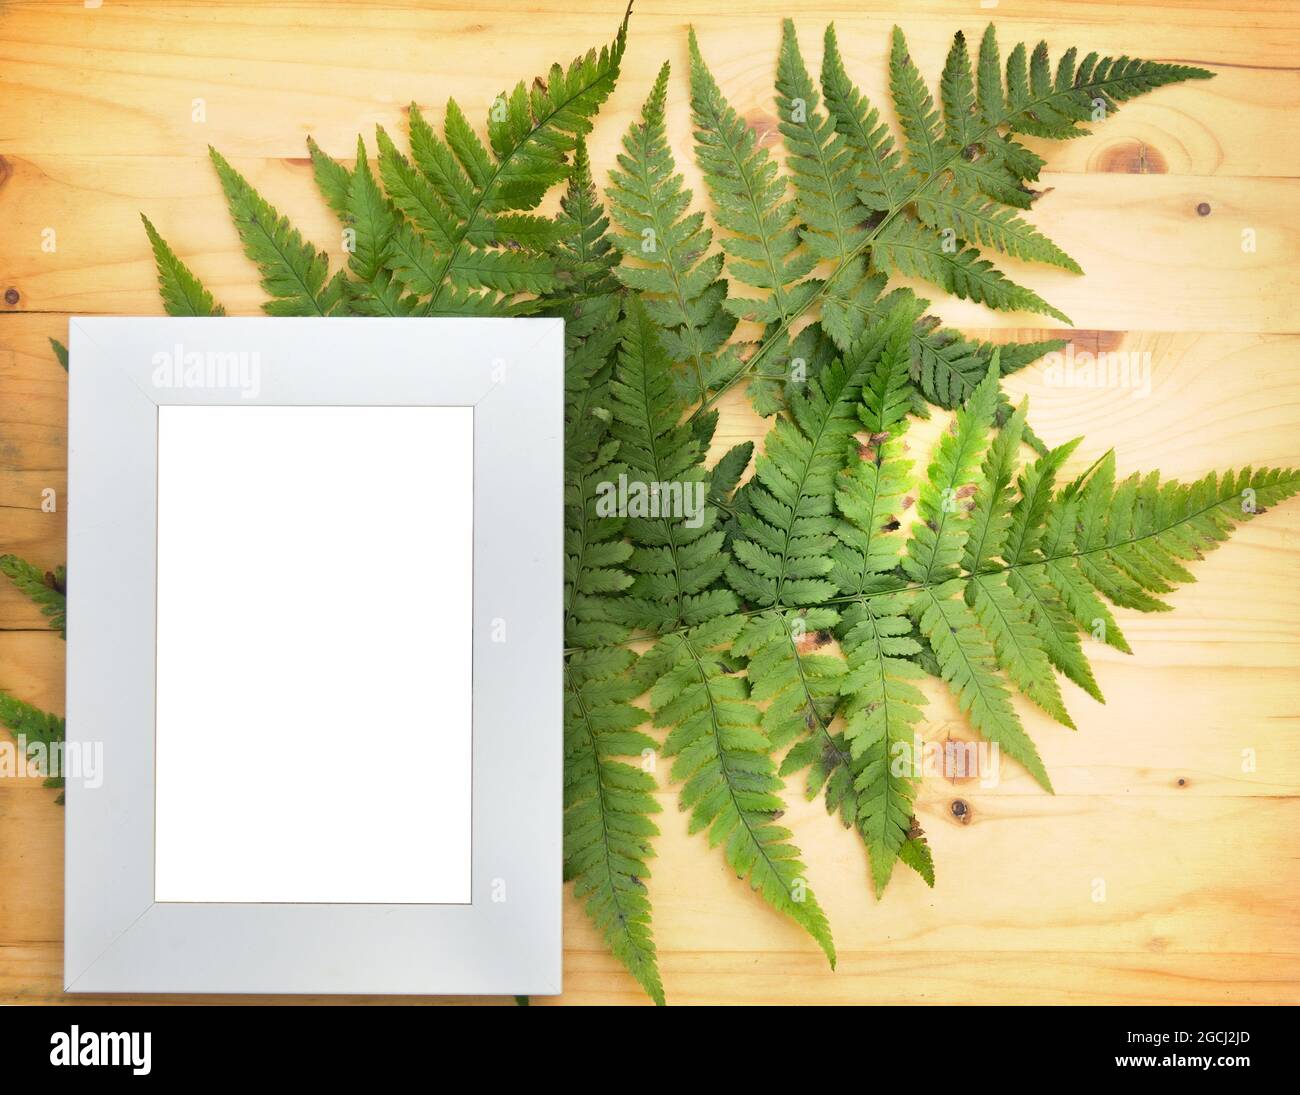 Bracken (Pteris). Floral still life on a polished wooden background with a signature frame Stock Photo